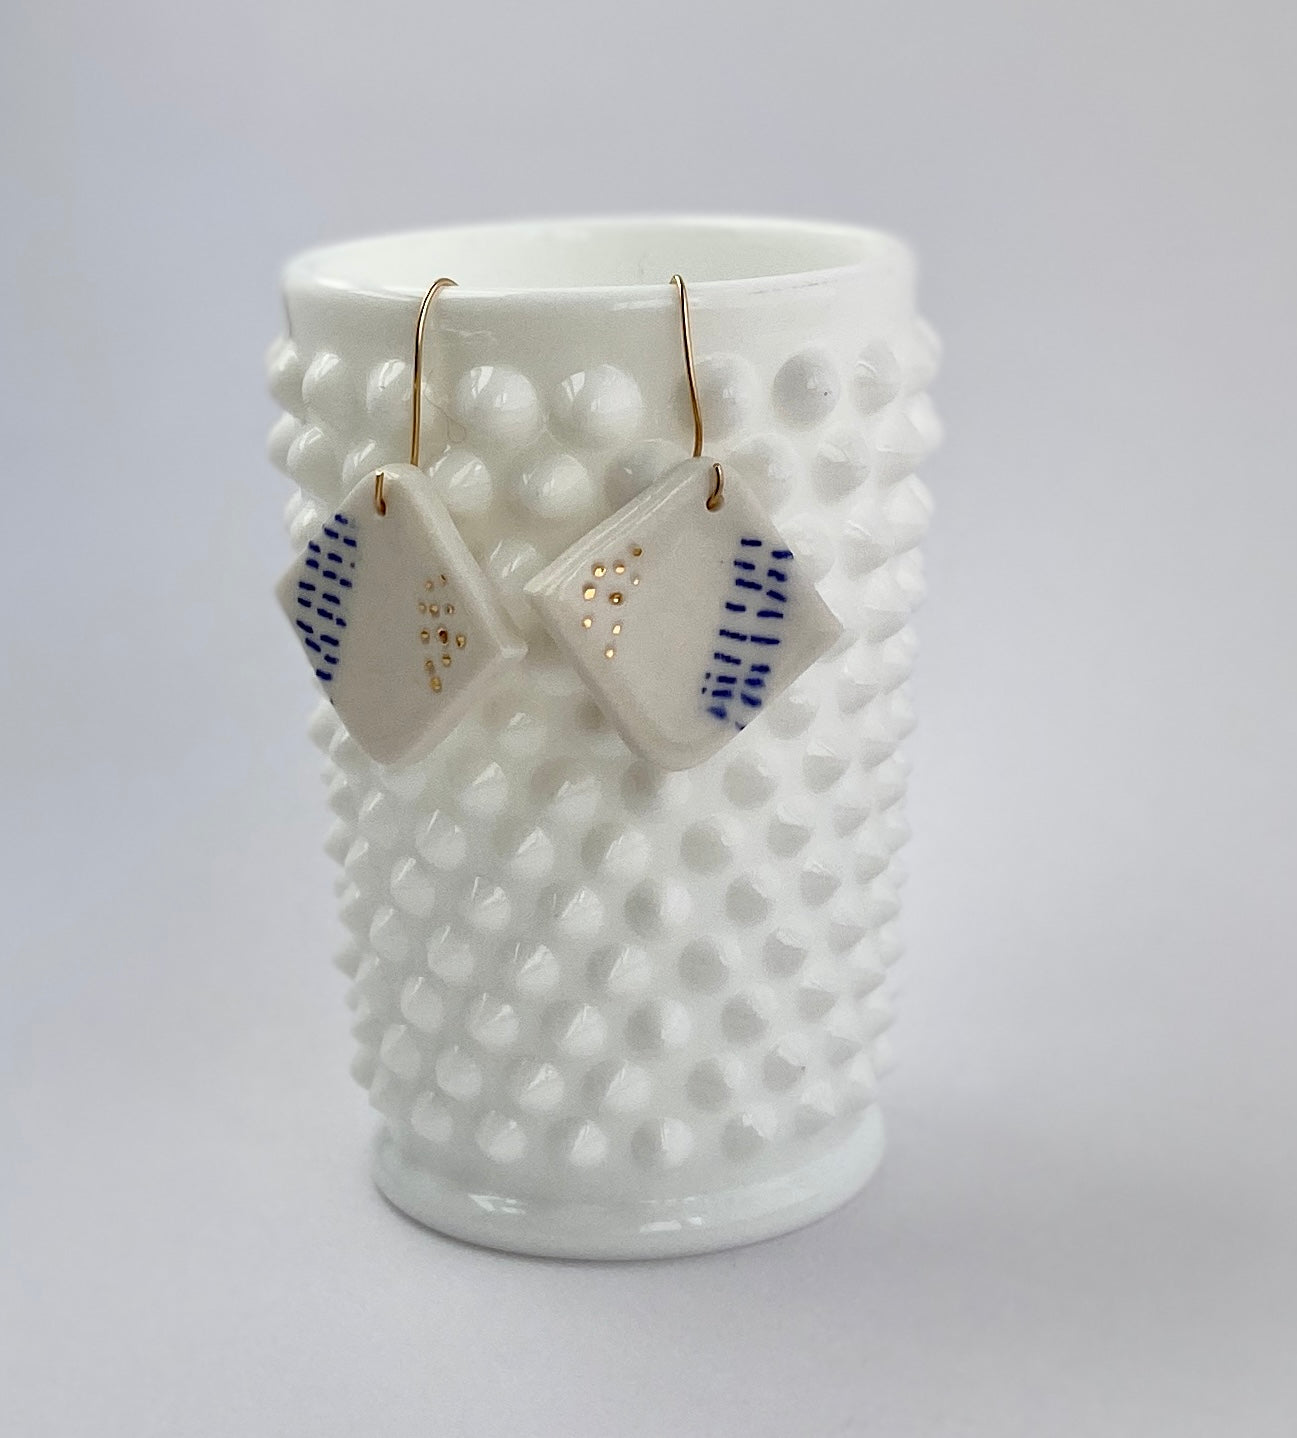 Porcelain geometric earring with 22 karat gold accents.